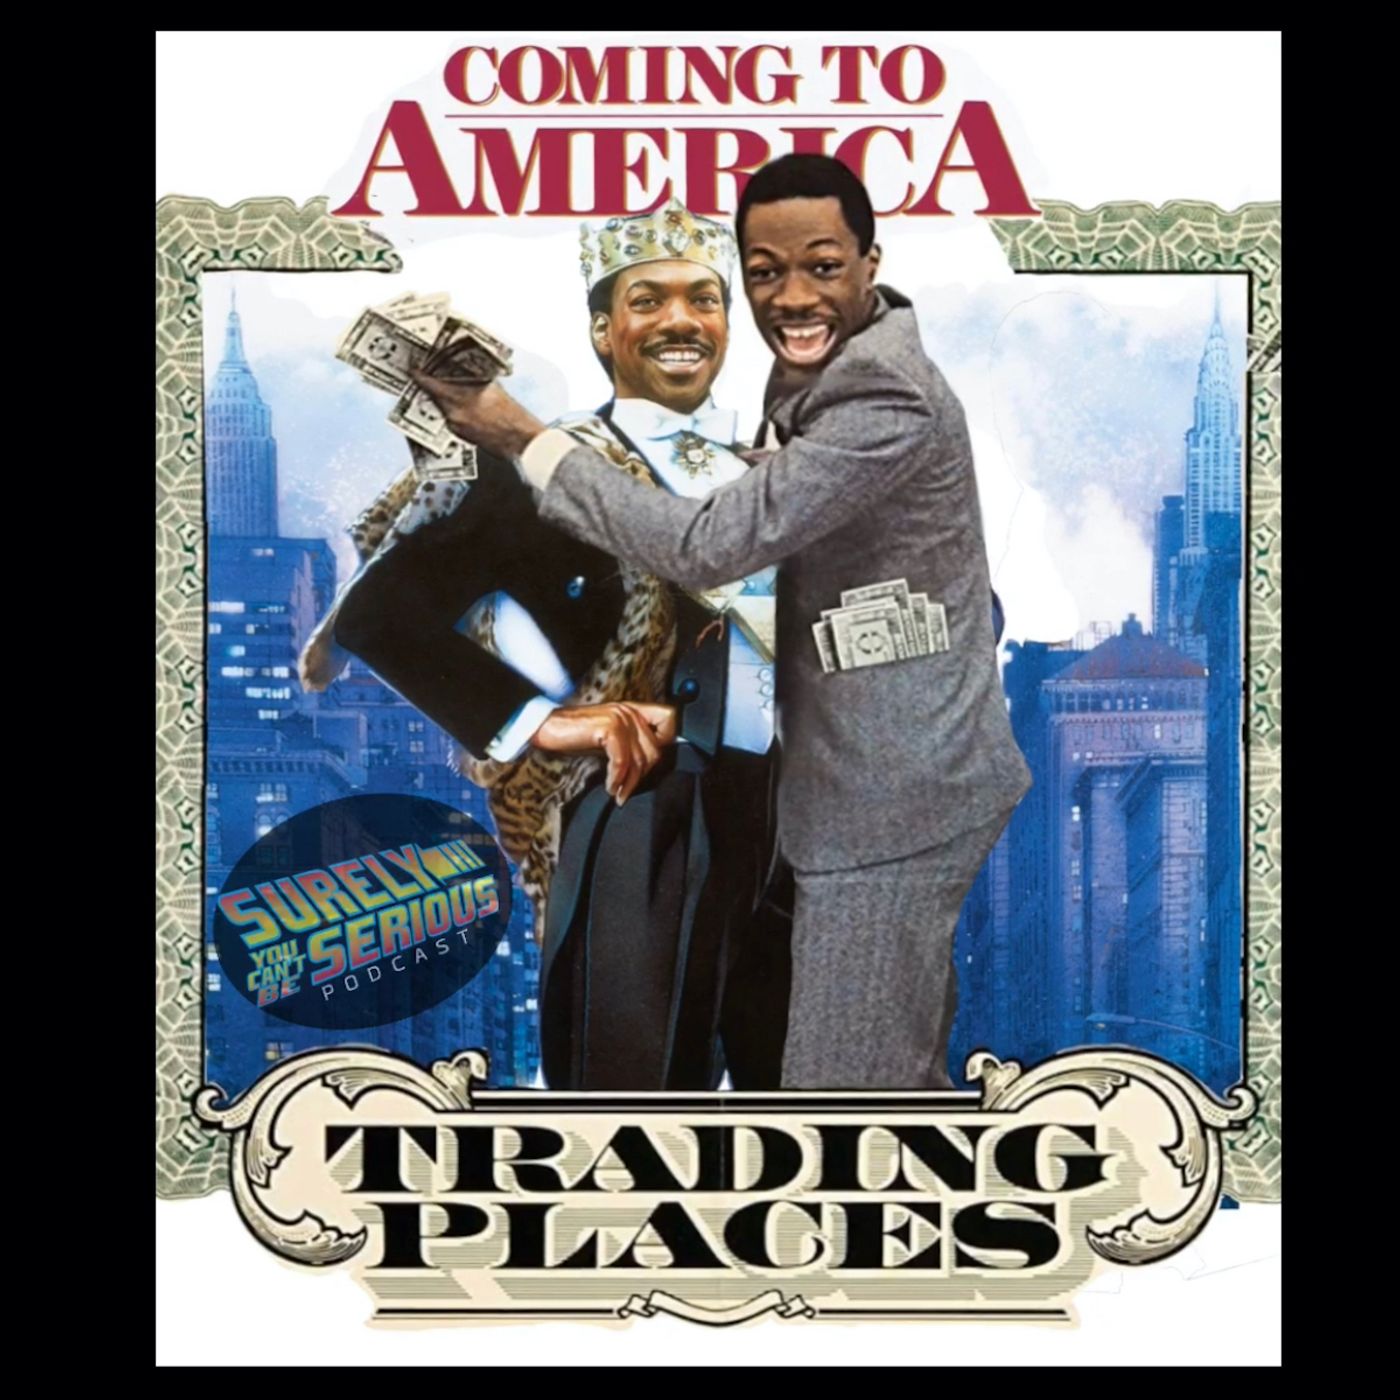 Trading Places ('83) or Coming to America ('88): Which Eddie Murphy and John Landis movie is the Best?! Image